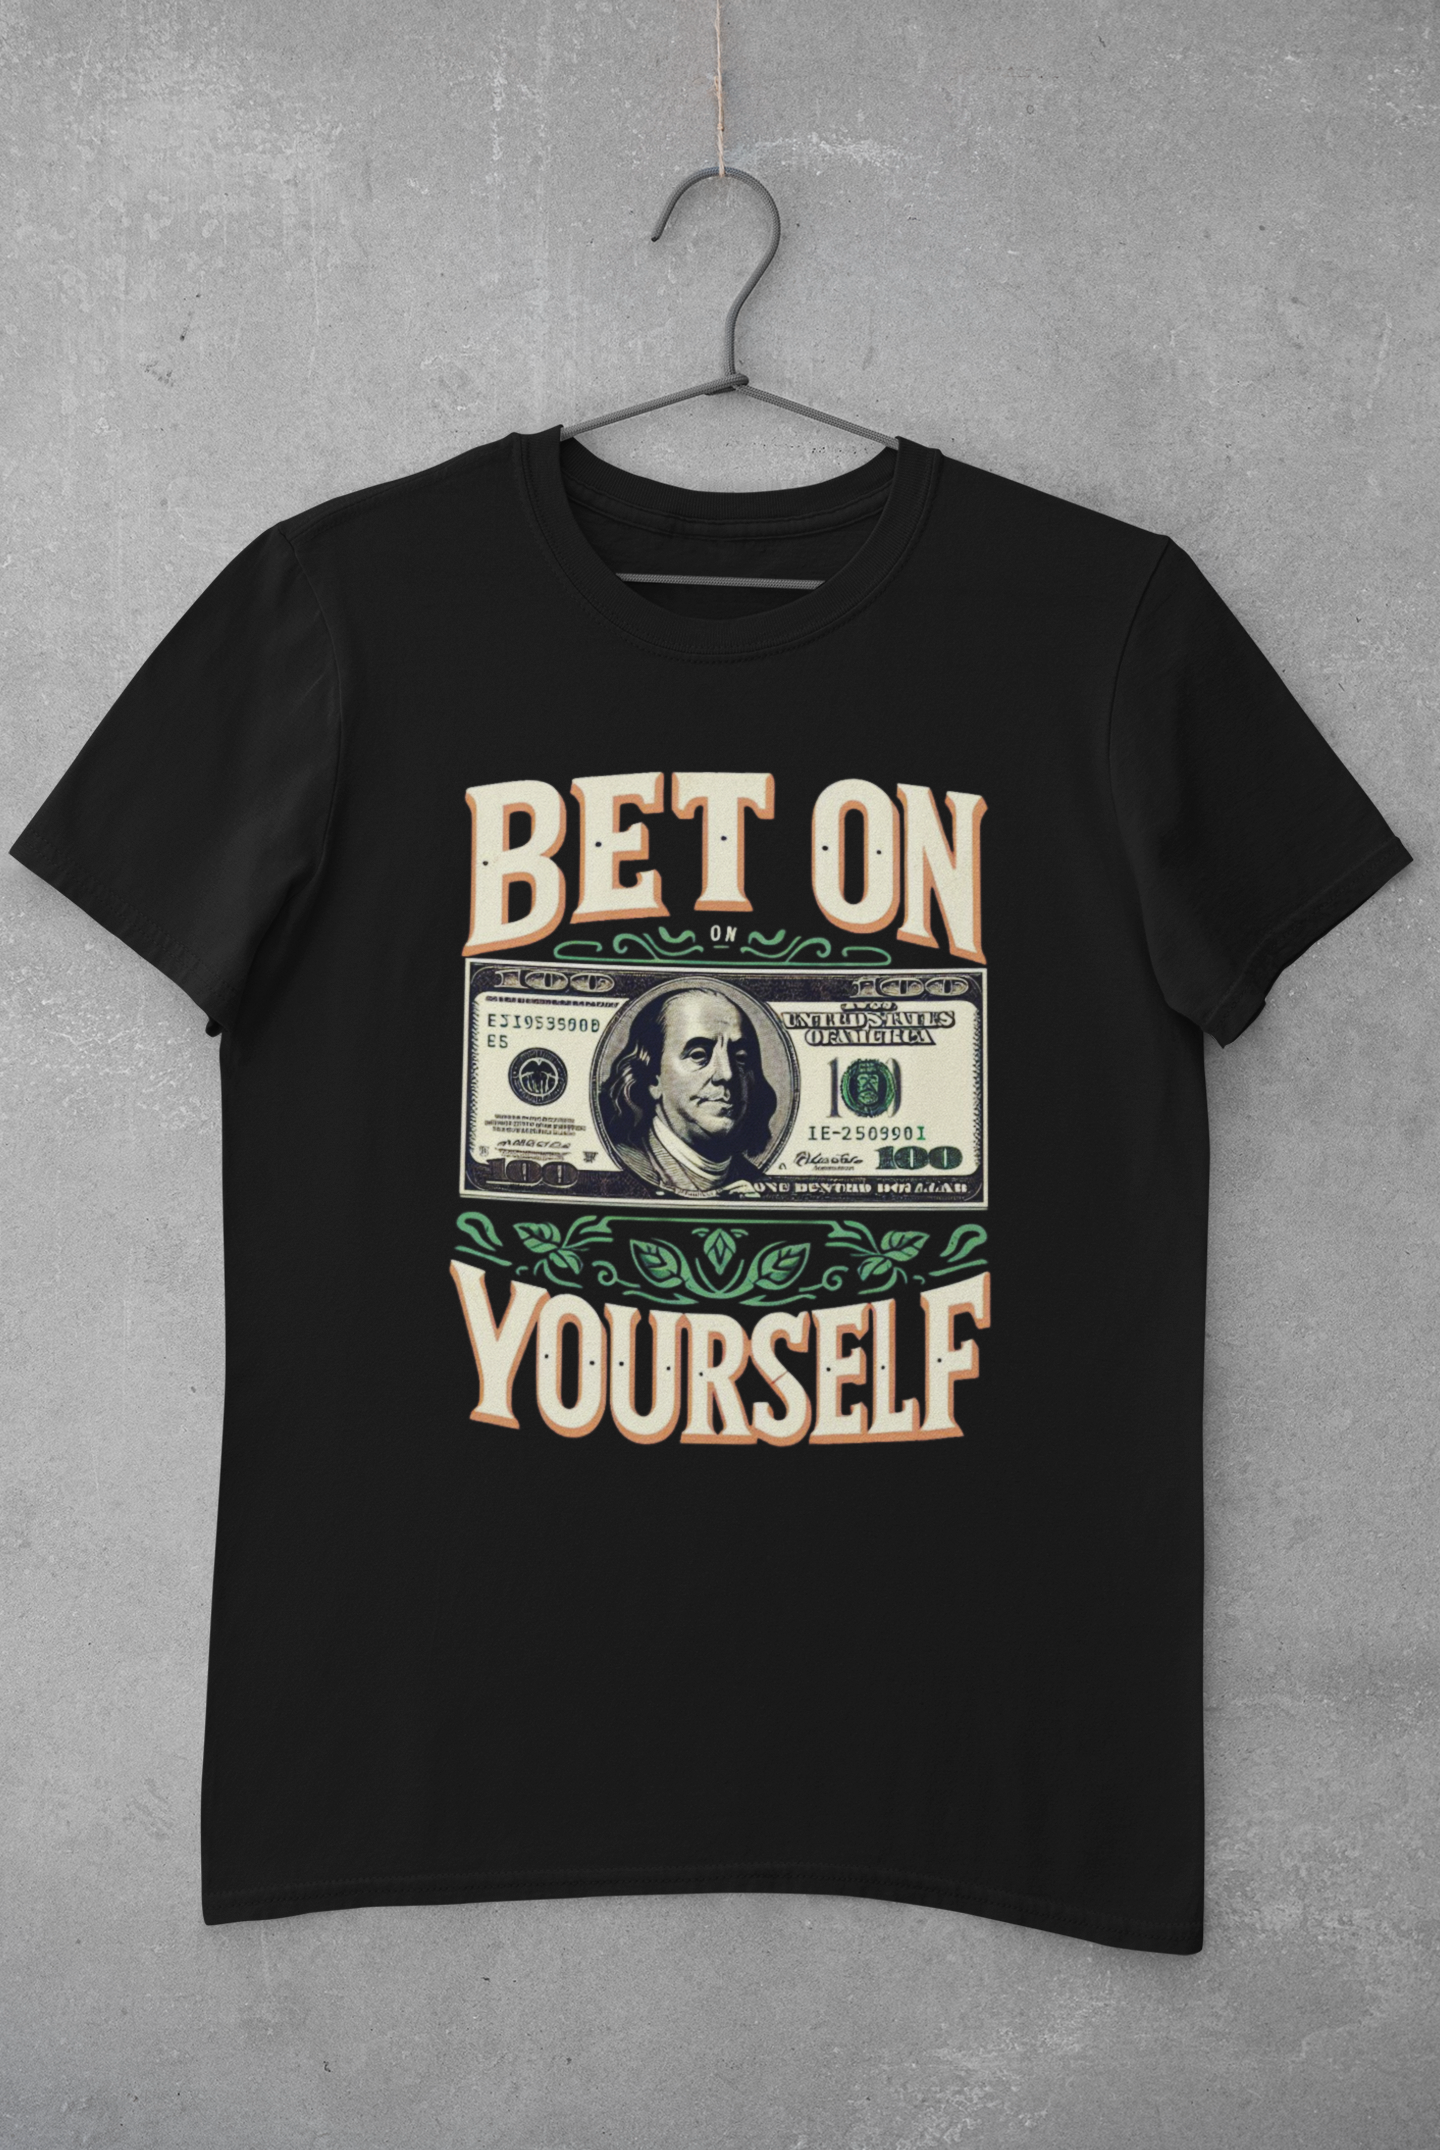 'Bet On Yourself' T-Shirt